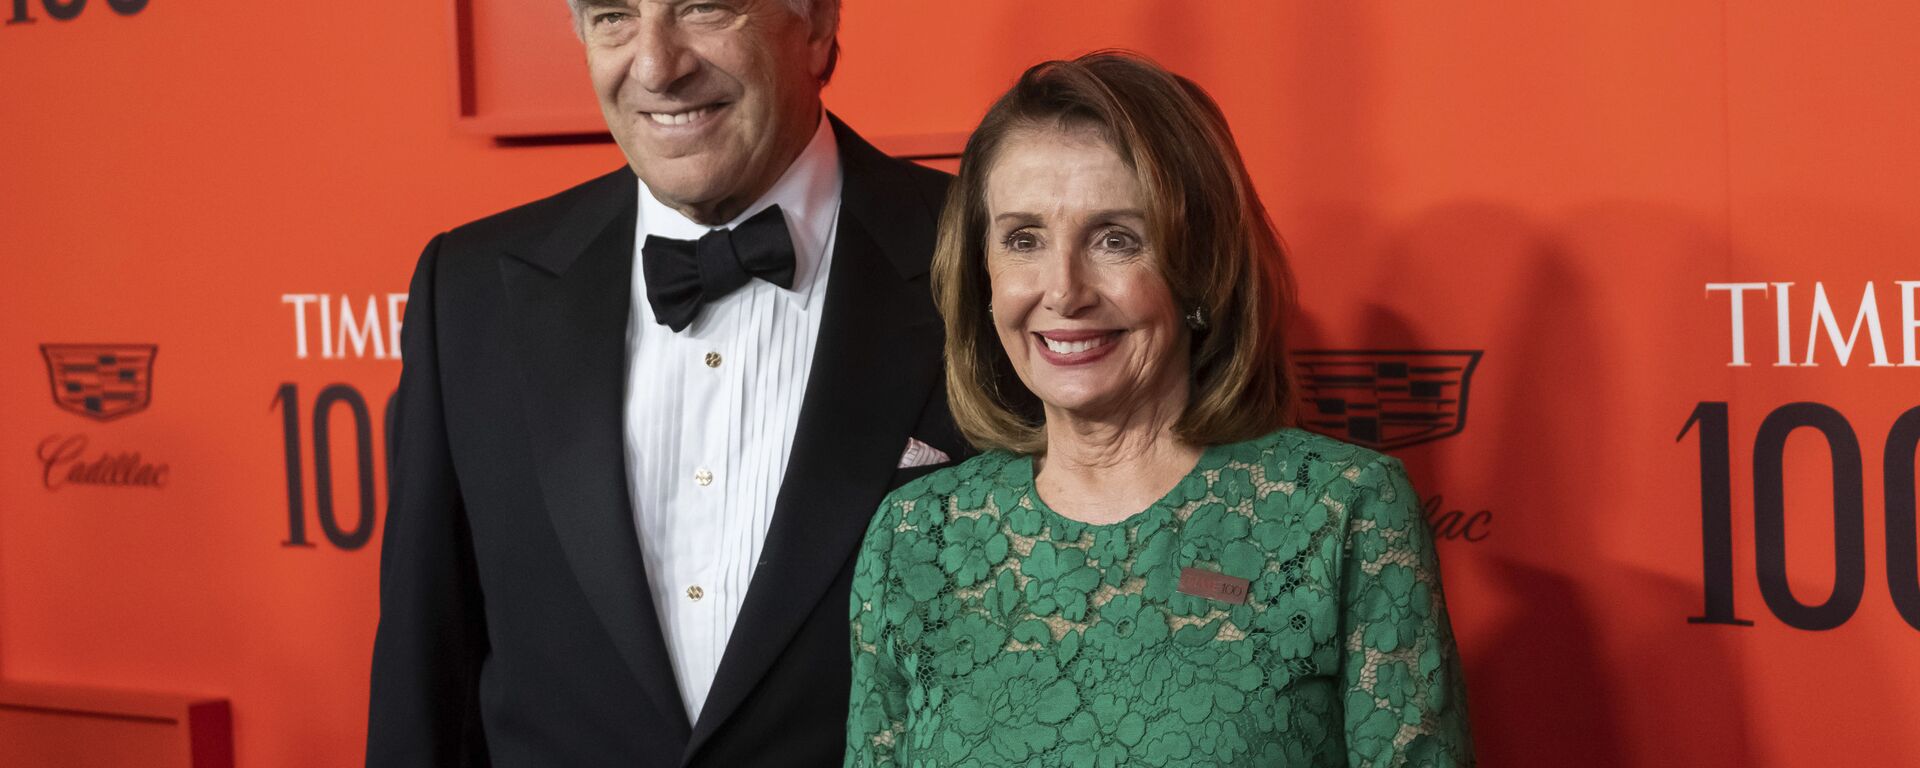 Paul Pelosi and Nancy Pelosi attend the 2019 Time 100 Gala, celebrating the 100 most influential people in the world, at Frederick P. Rose Hall, Jazz at Lincoln Center on Tuesday, April 23, 2019, in New York - Sputnik International, 1920, 06.08.2022